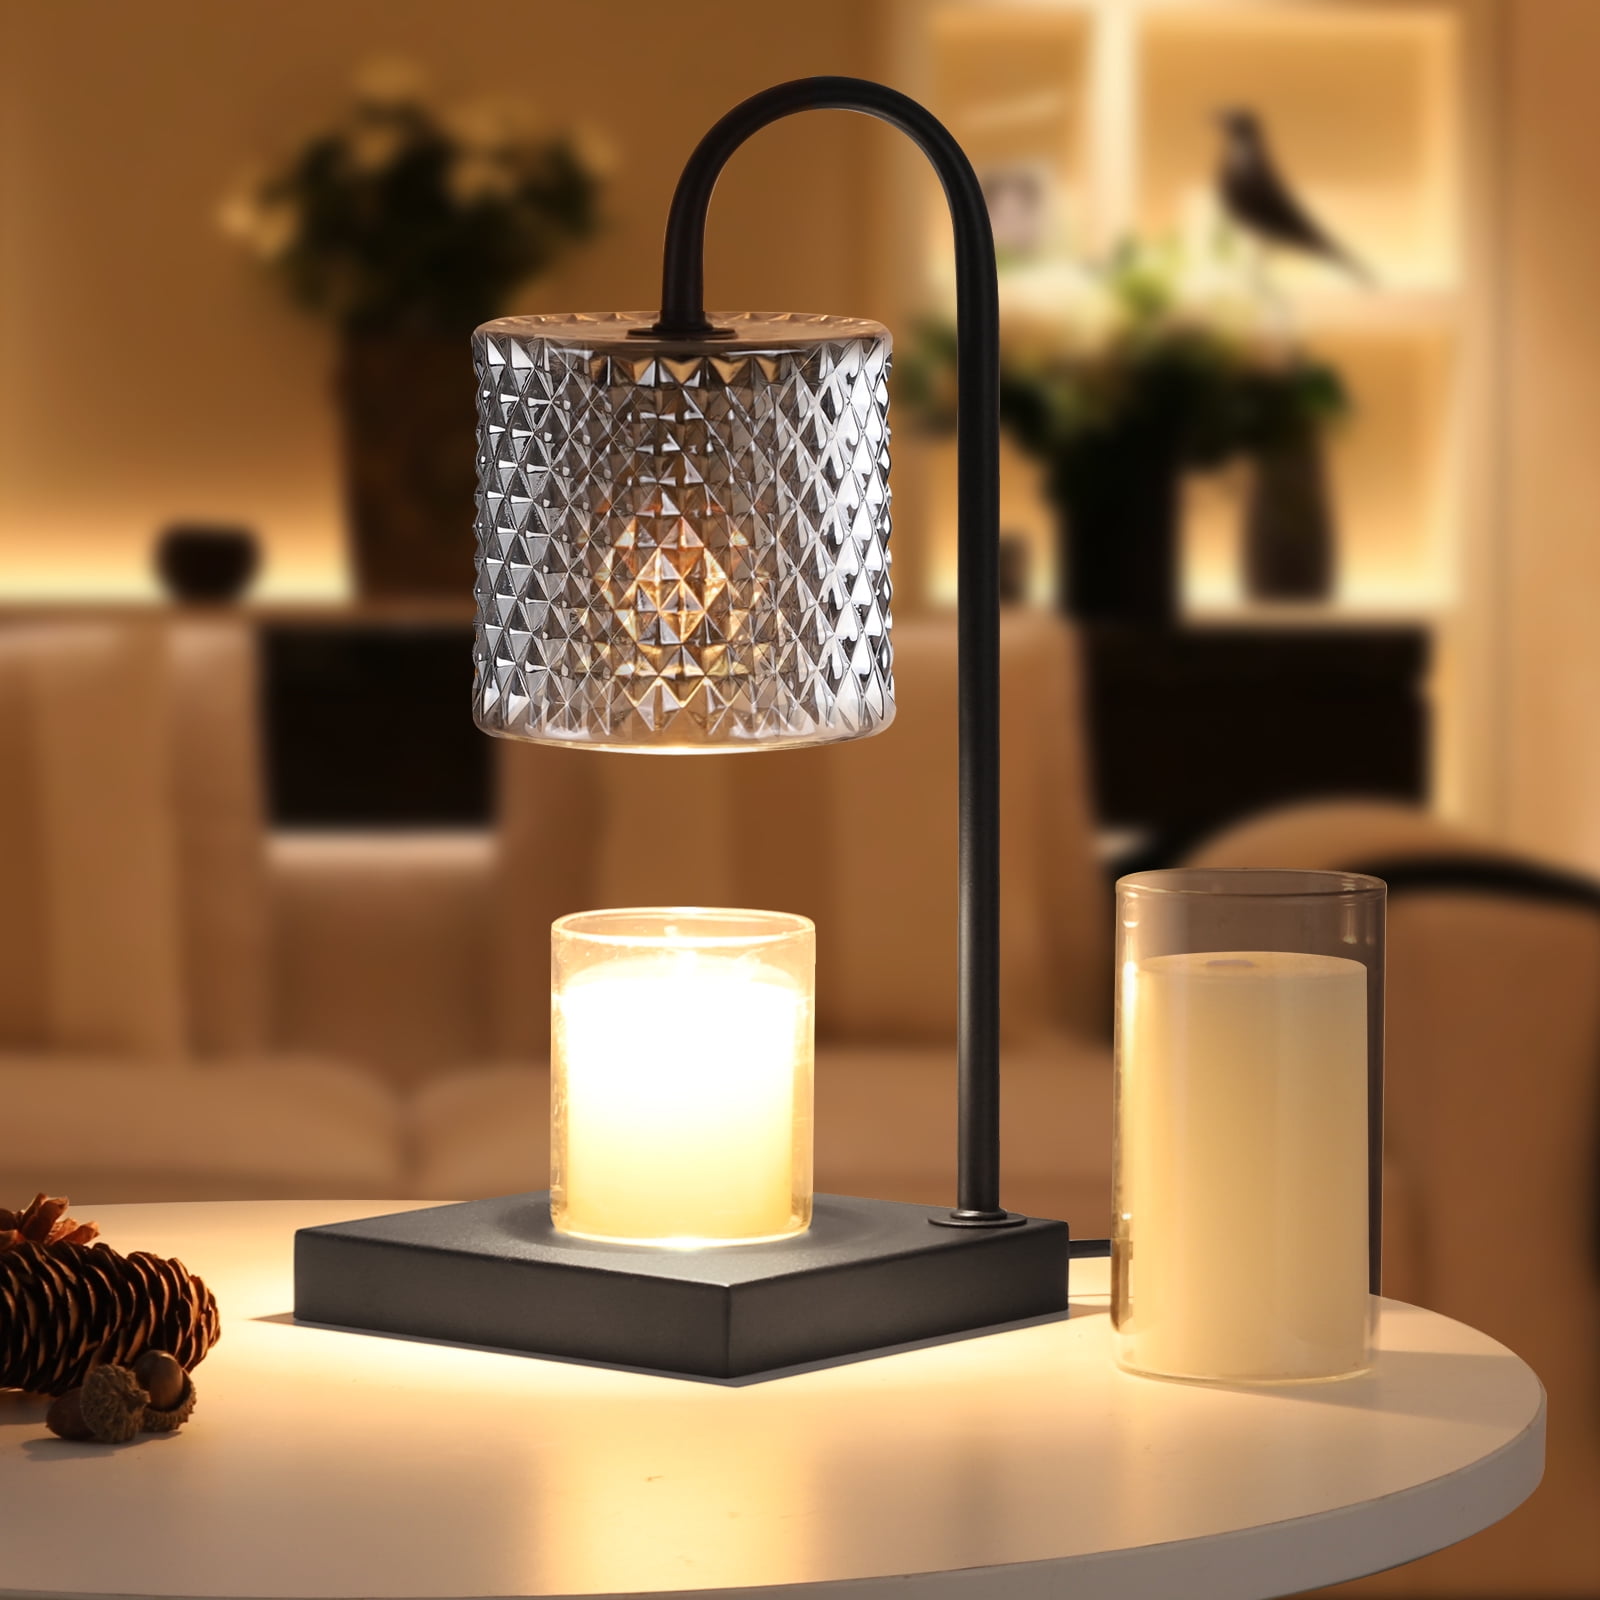 Candle Warmer Lamp With Dimmer - World Market